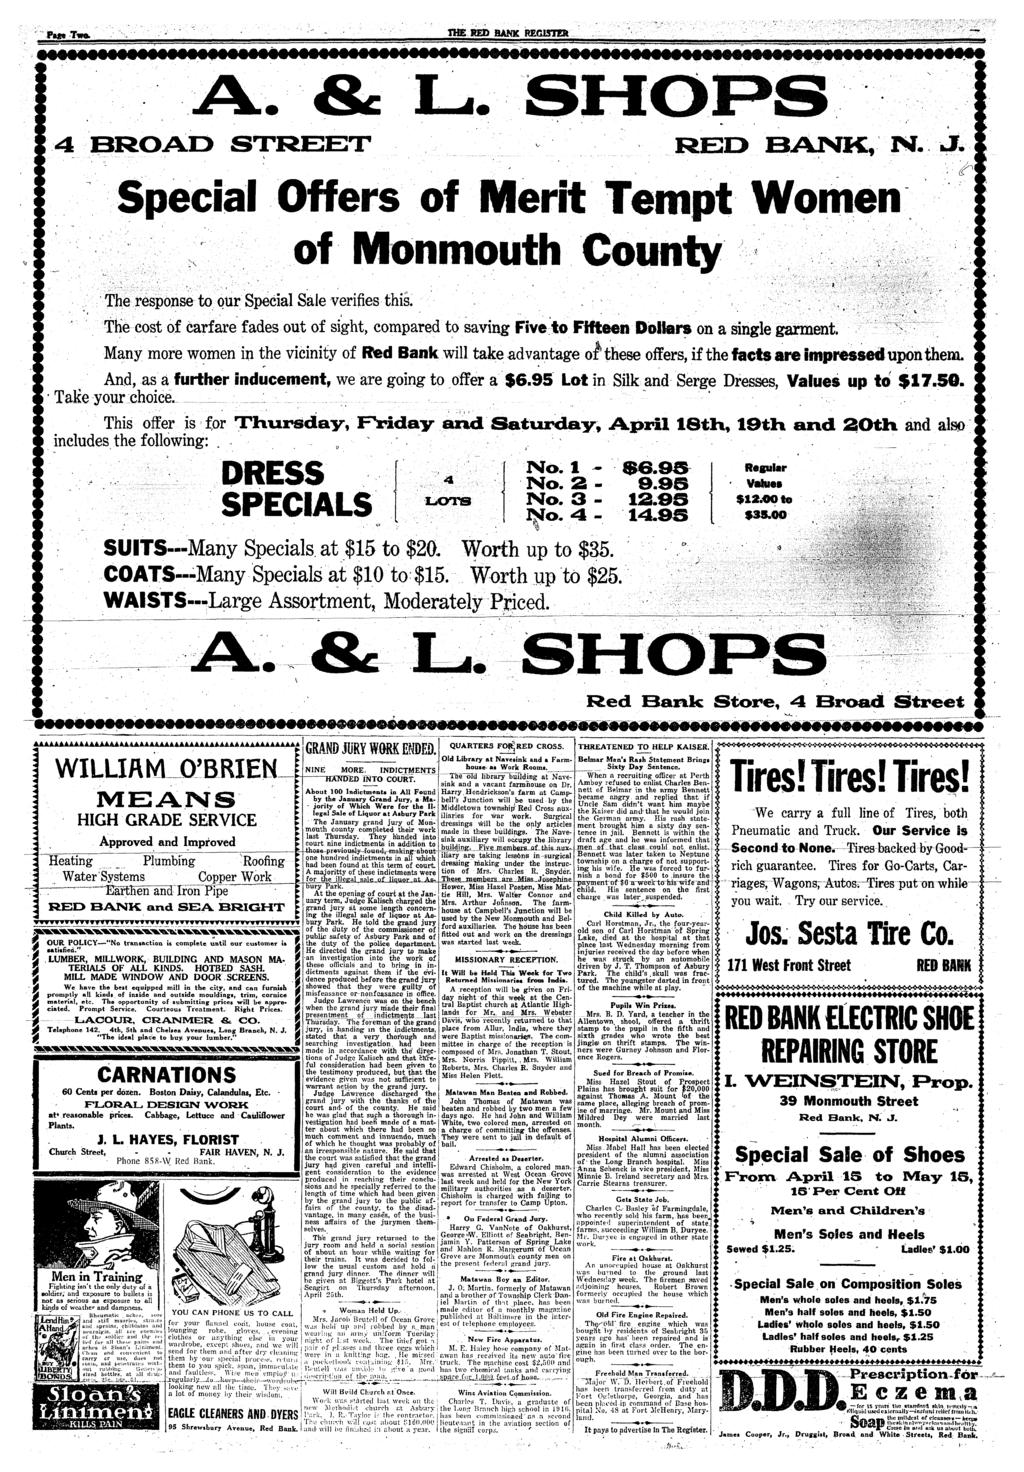 PkM TWO. THE RED BANK REGISTER A- 4 BROAD STREET FUBD BANK, N. Specal Offers of Mert Tempt Women of Monmouth County, ". The response to pur Specal Sale verfes ths.